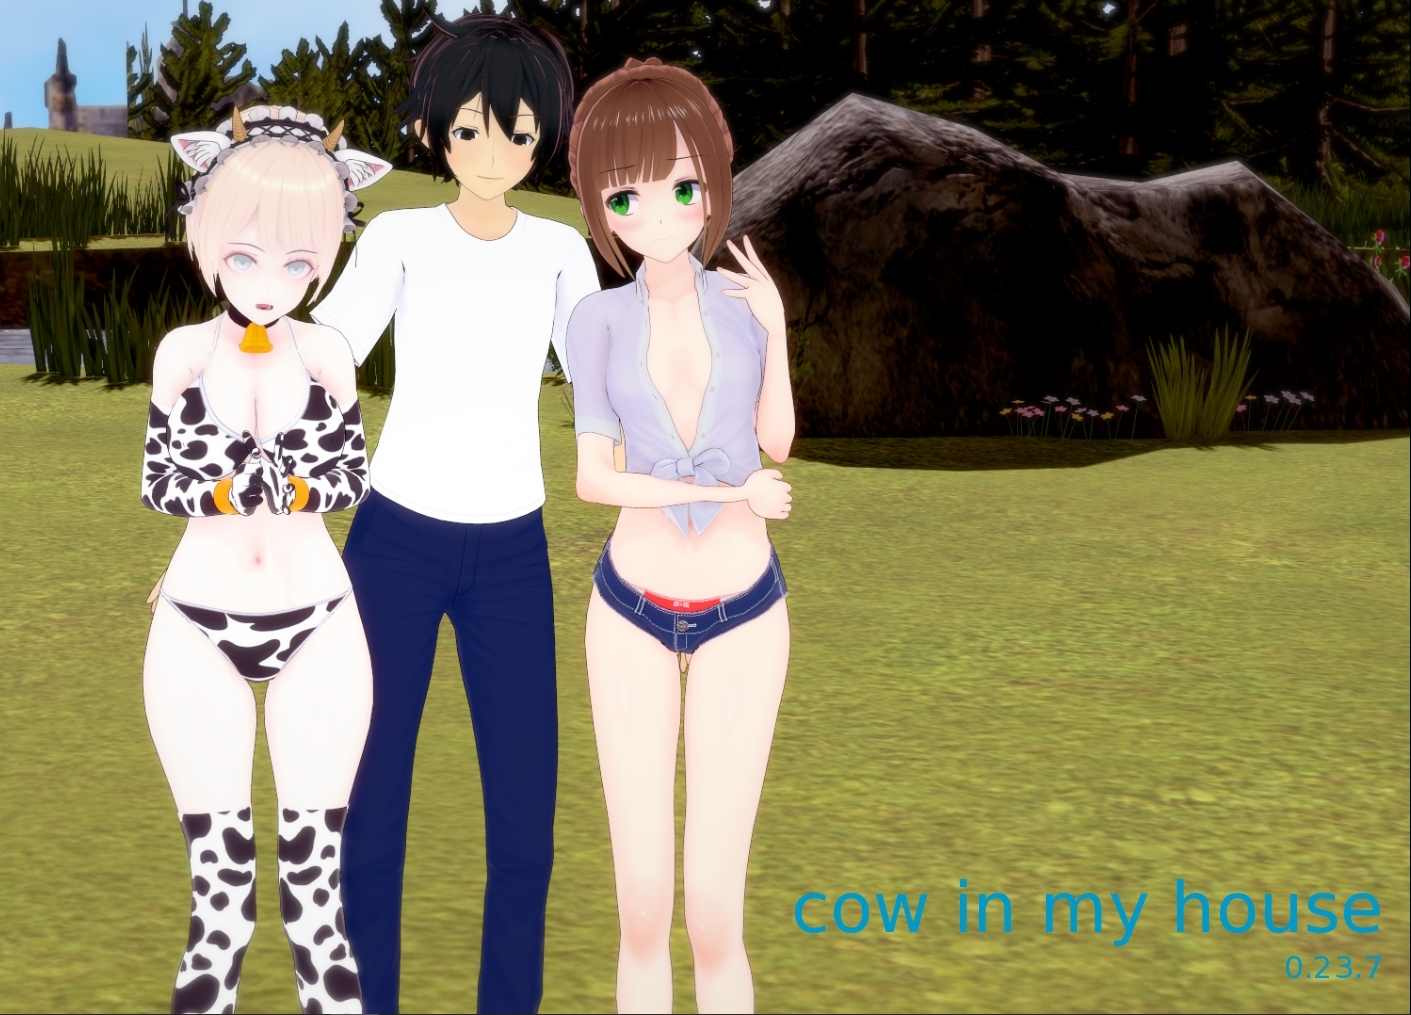 7 Cow Com - Cow In My House - Version 0.23.7 Download